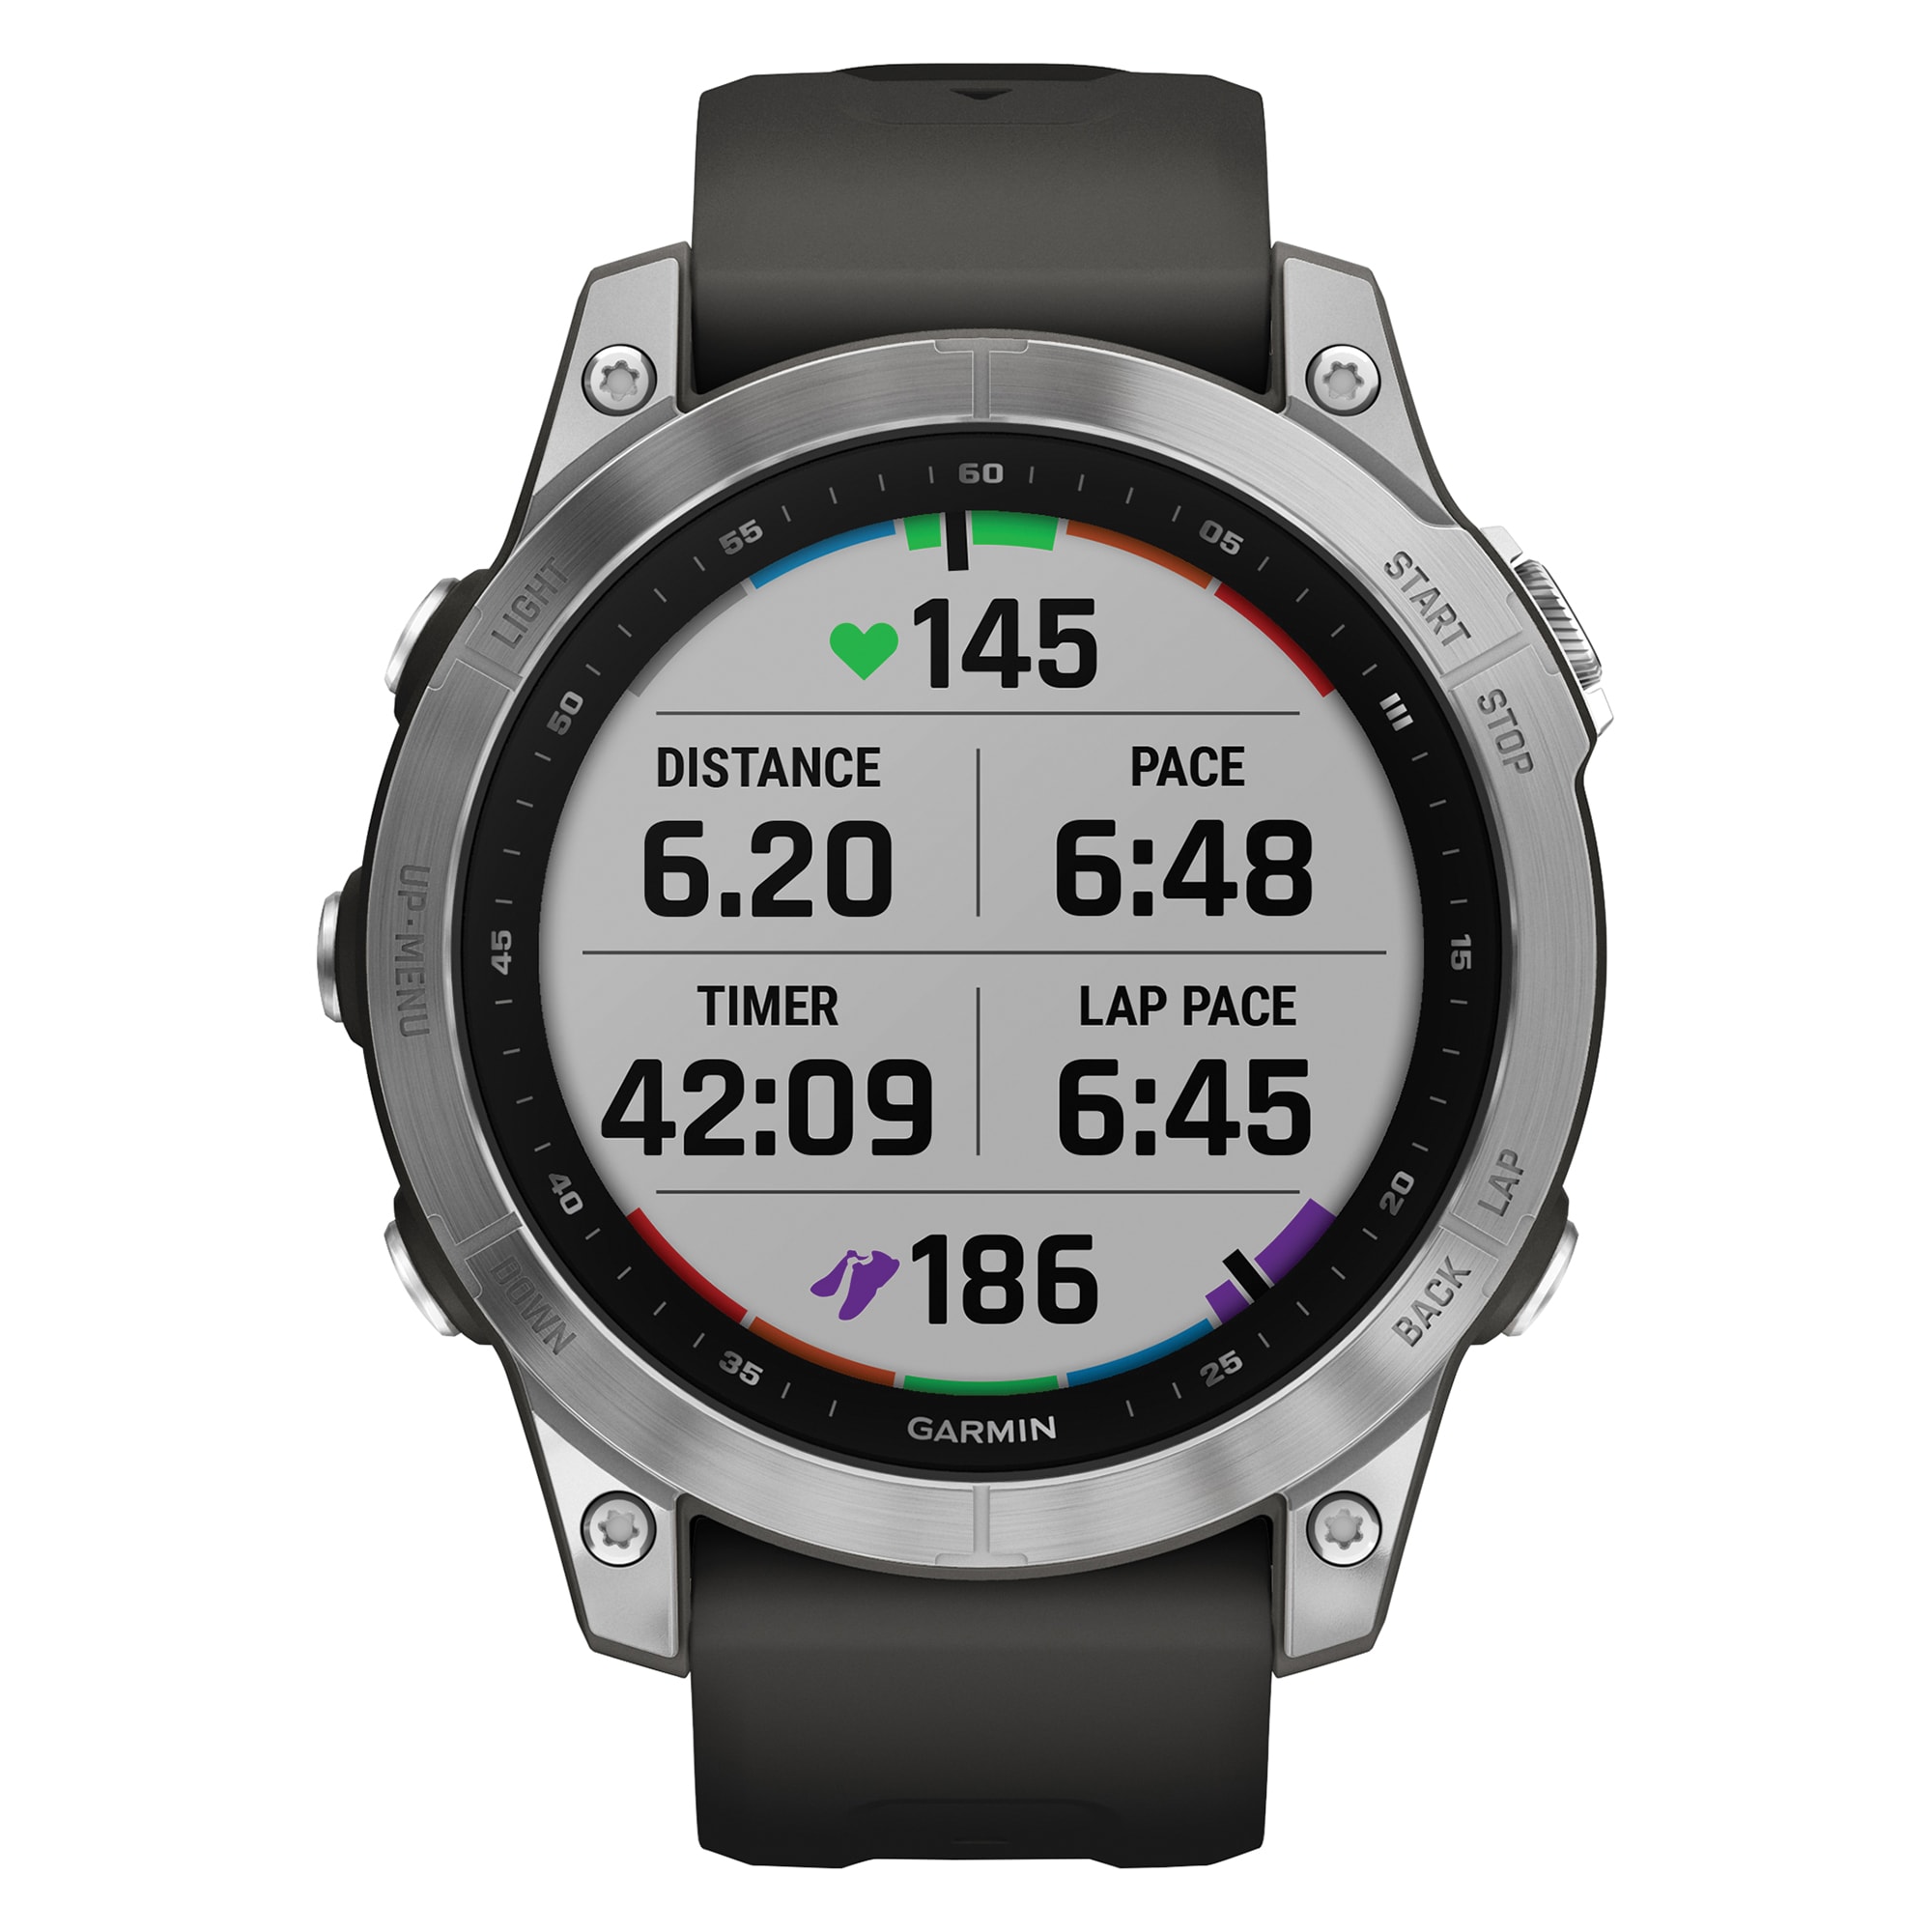 Garmin fenix 7 Smart Watch at Fitness Gps in Monitor department the Rate with Counter, Enabled and Heart Step Trackers